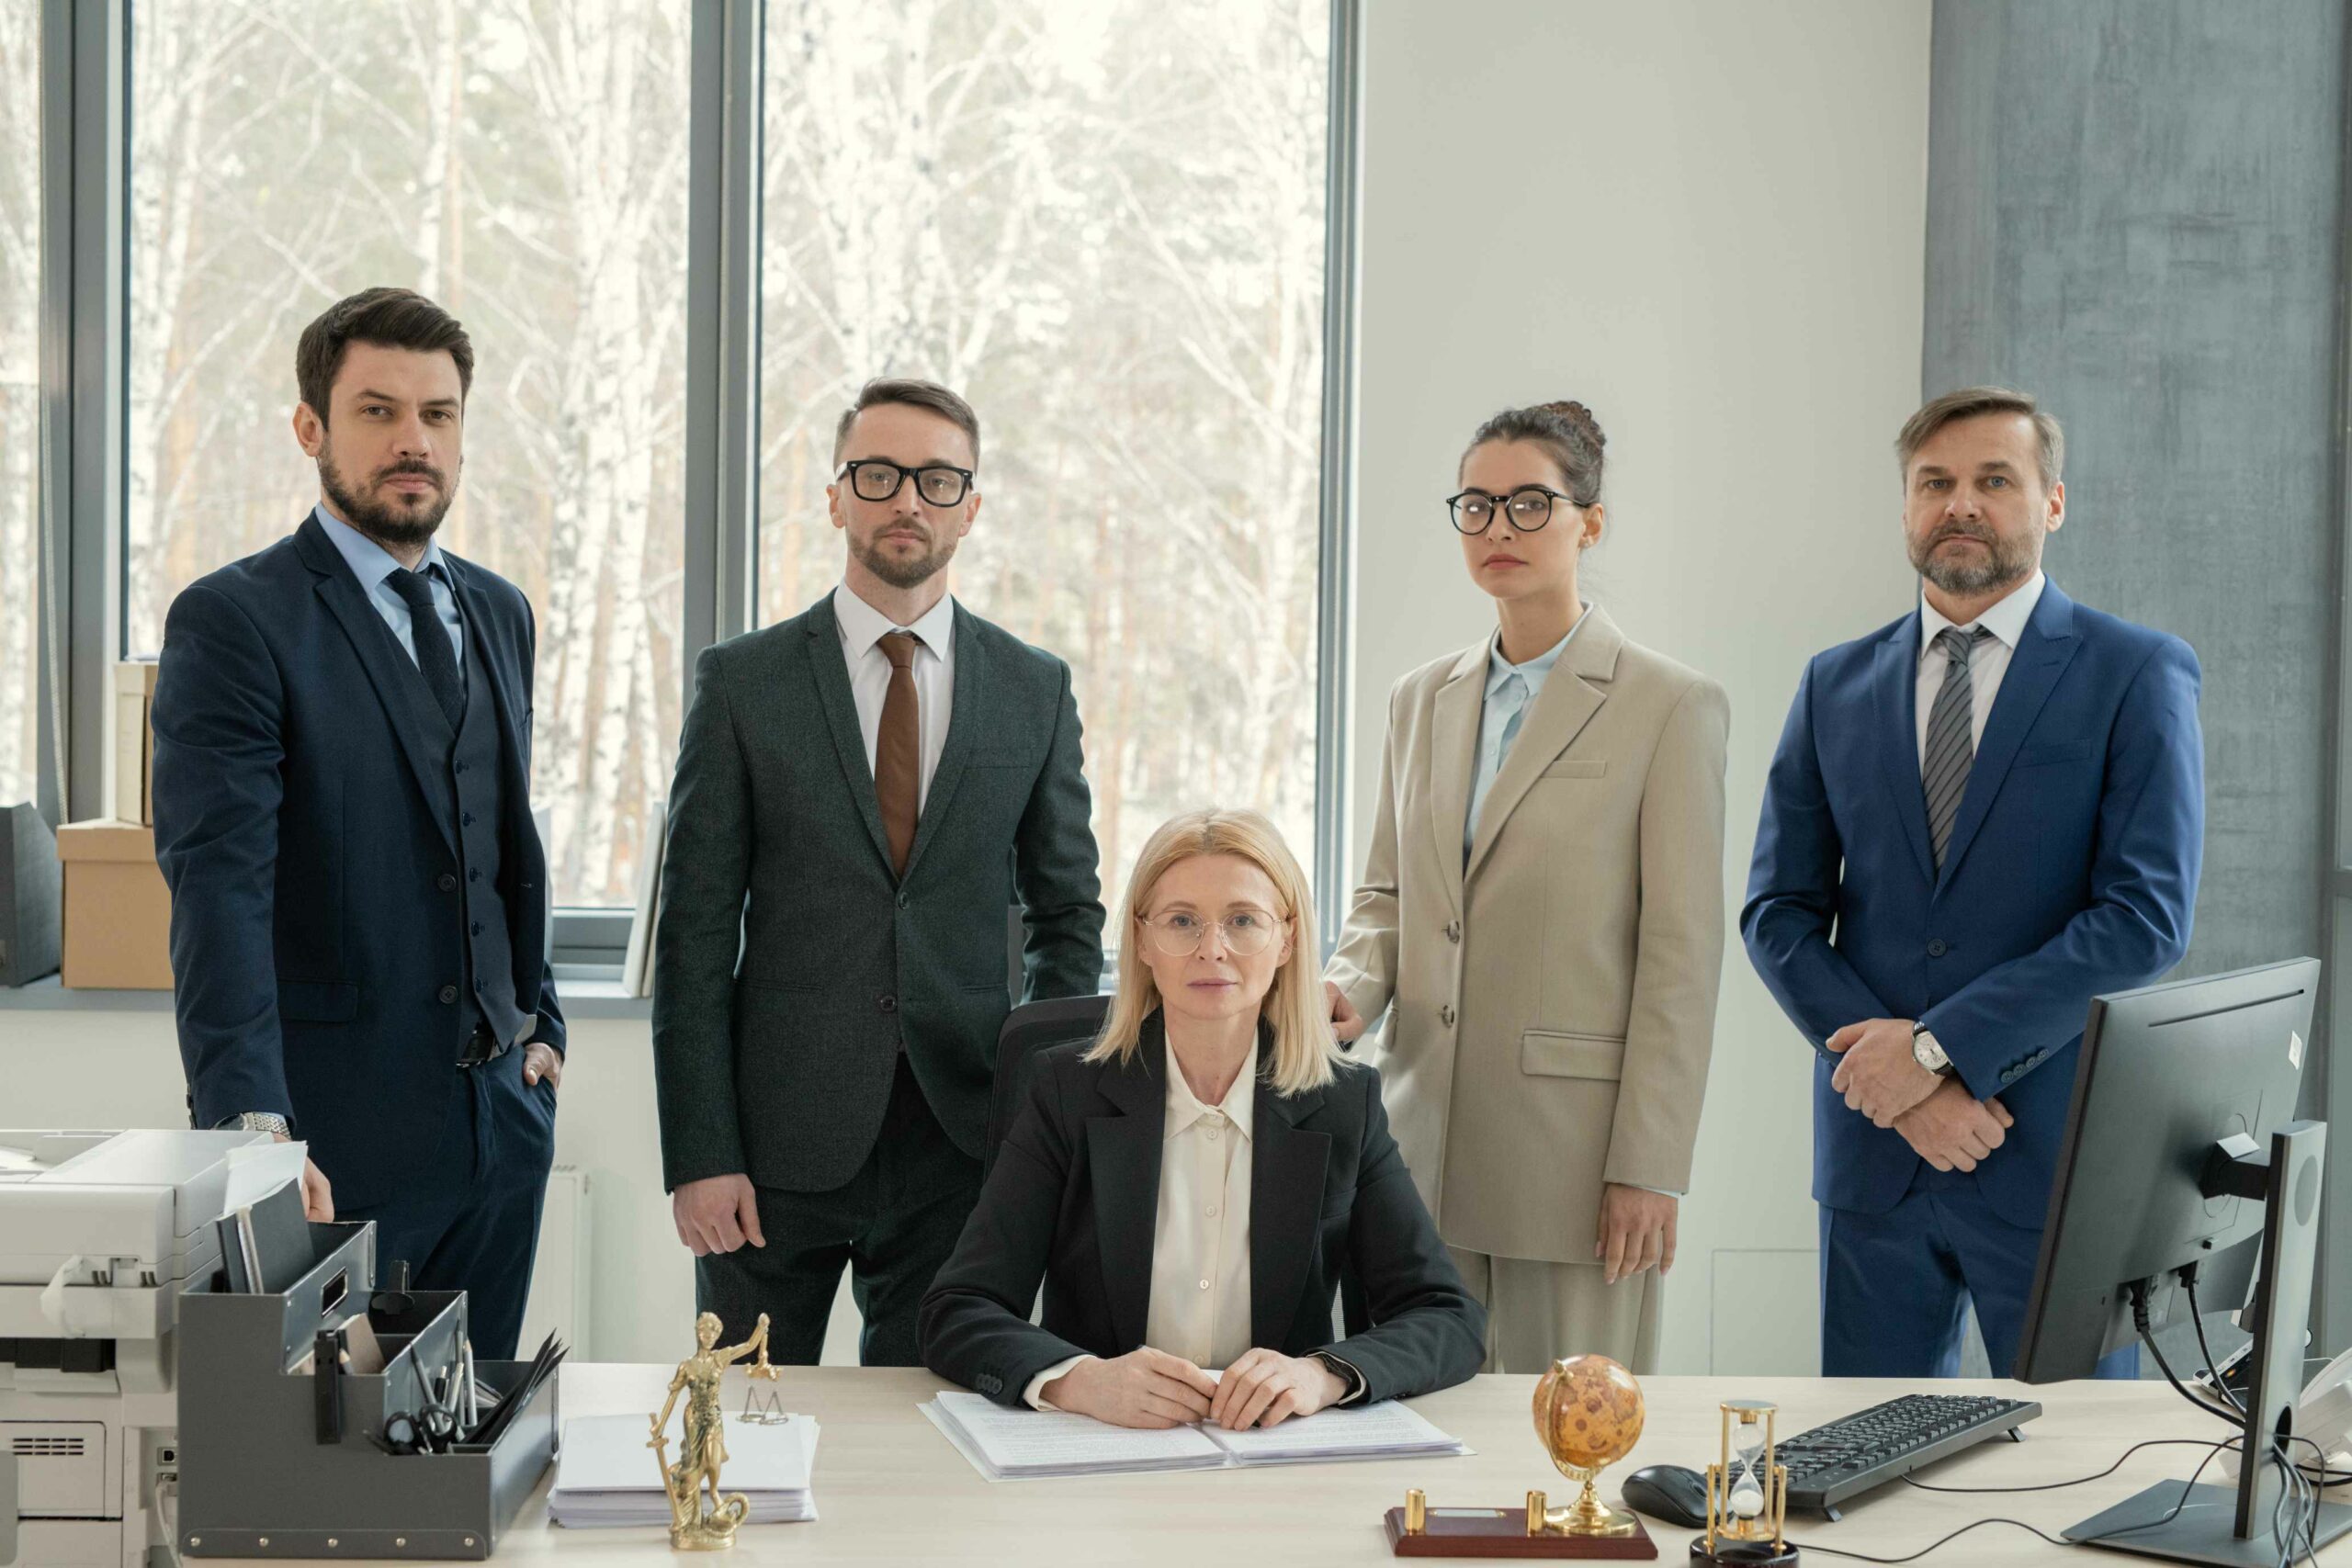 serious-mature-female-chef-law-firm-surrounded-by-lawyers-sitting-with-documents-desk-modern-office (1)